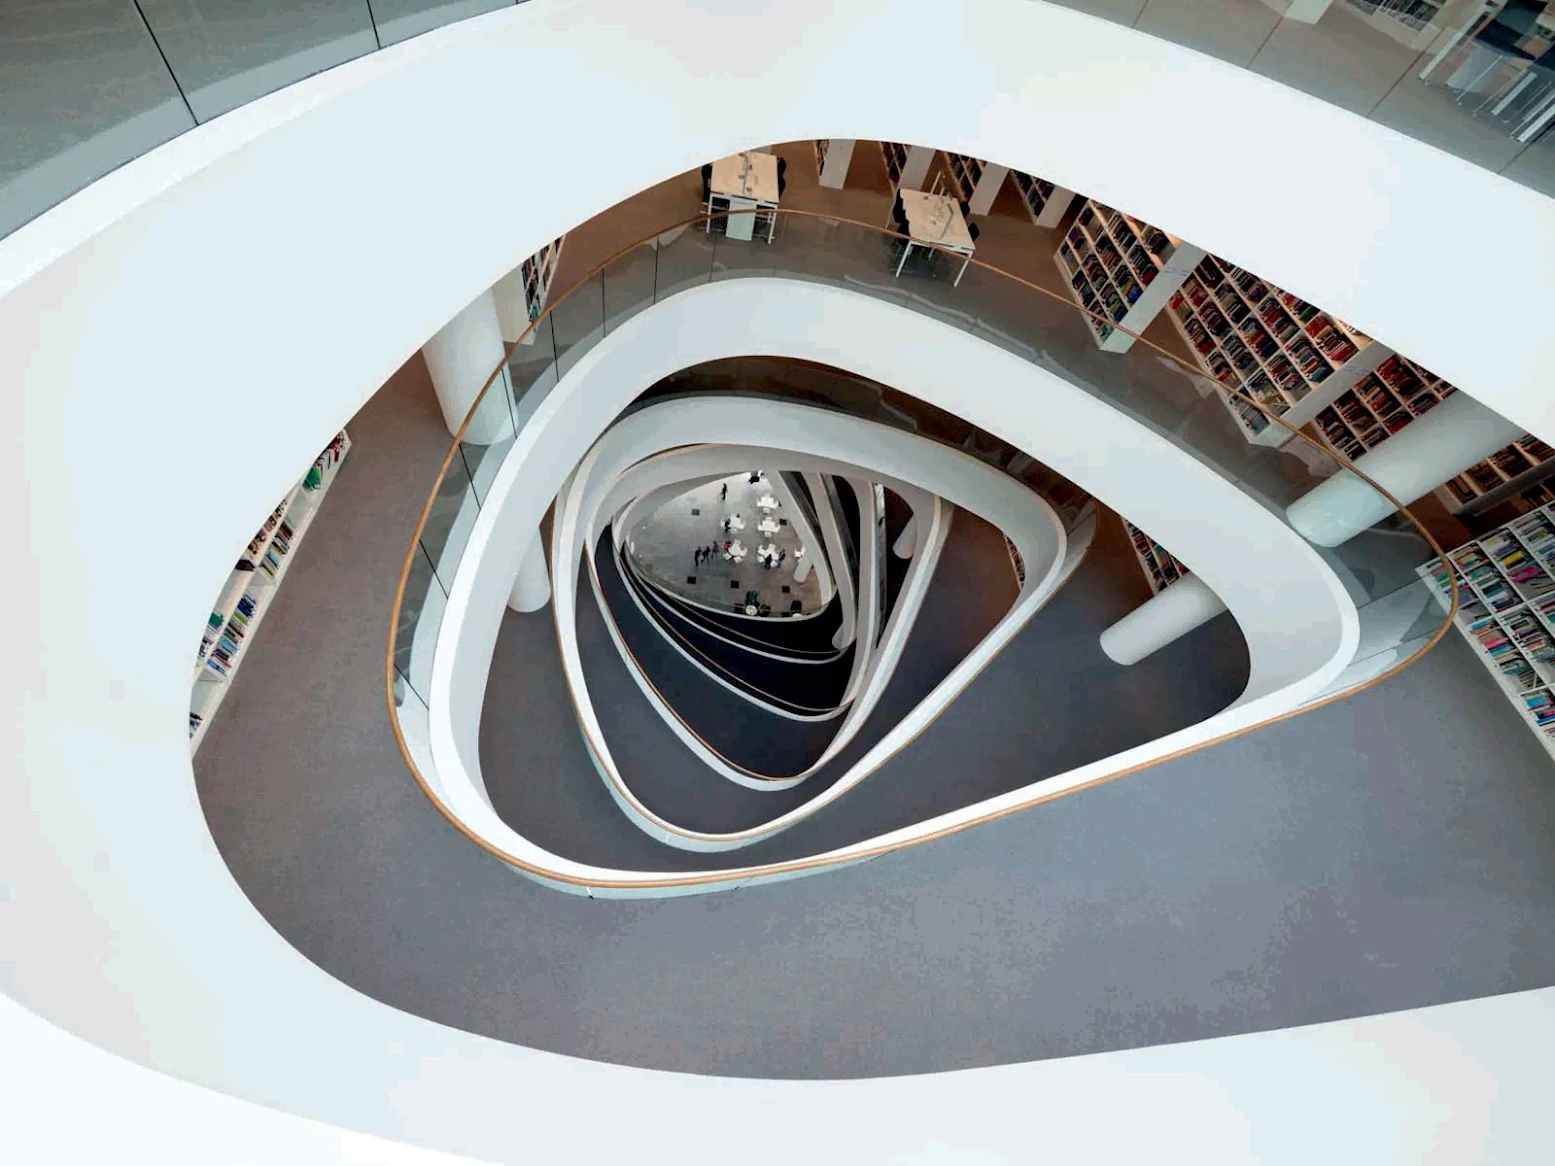 University Of Aberdeen New Library By Shl Architects